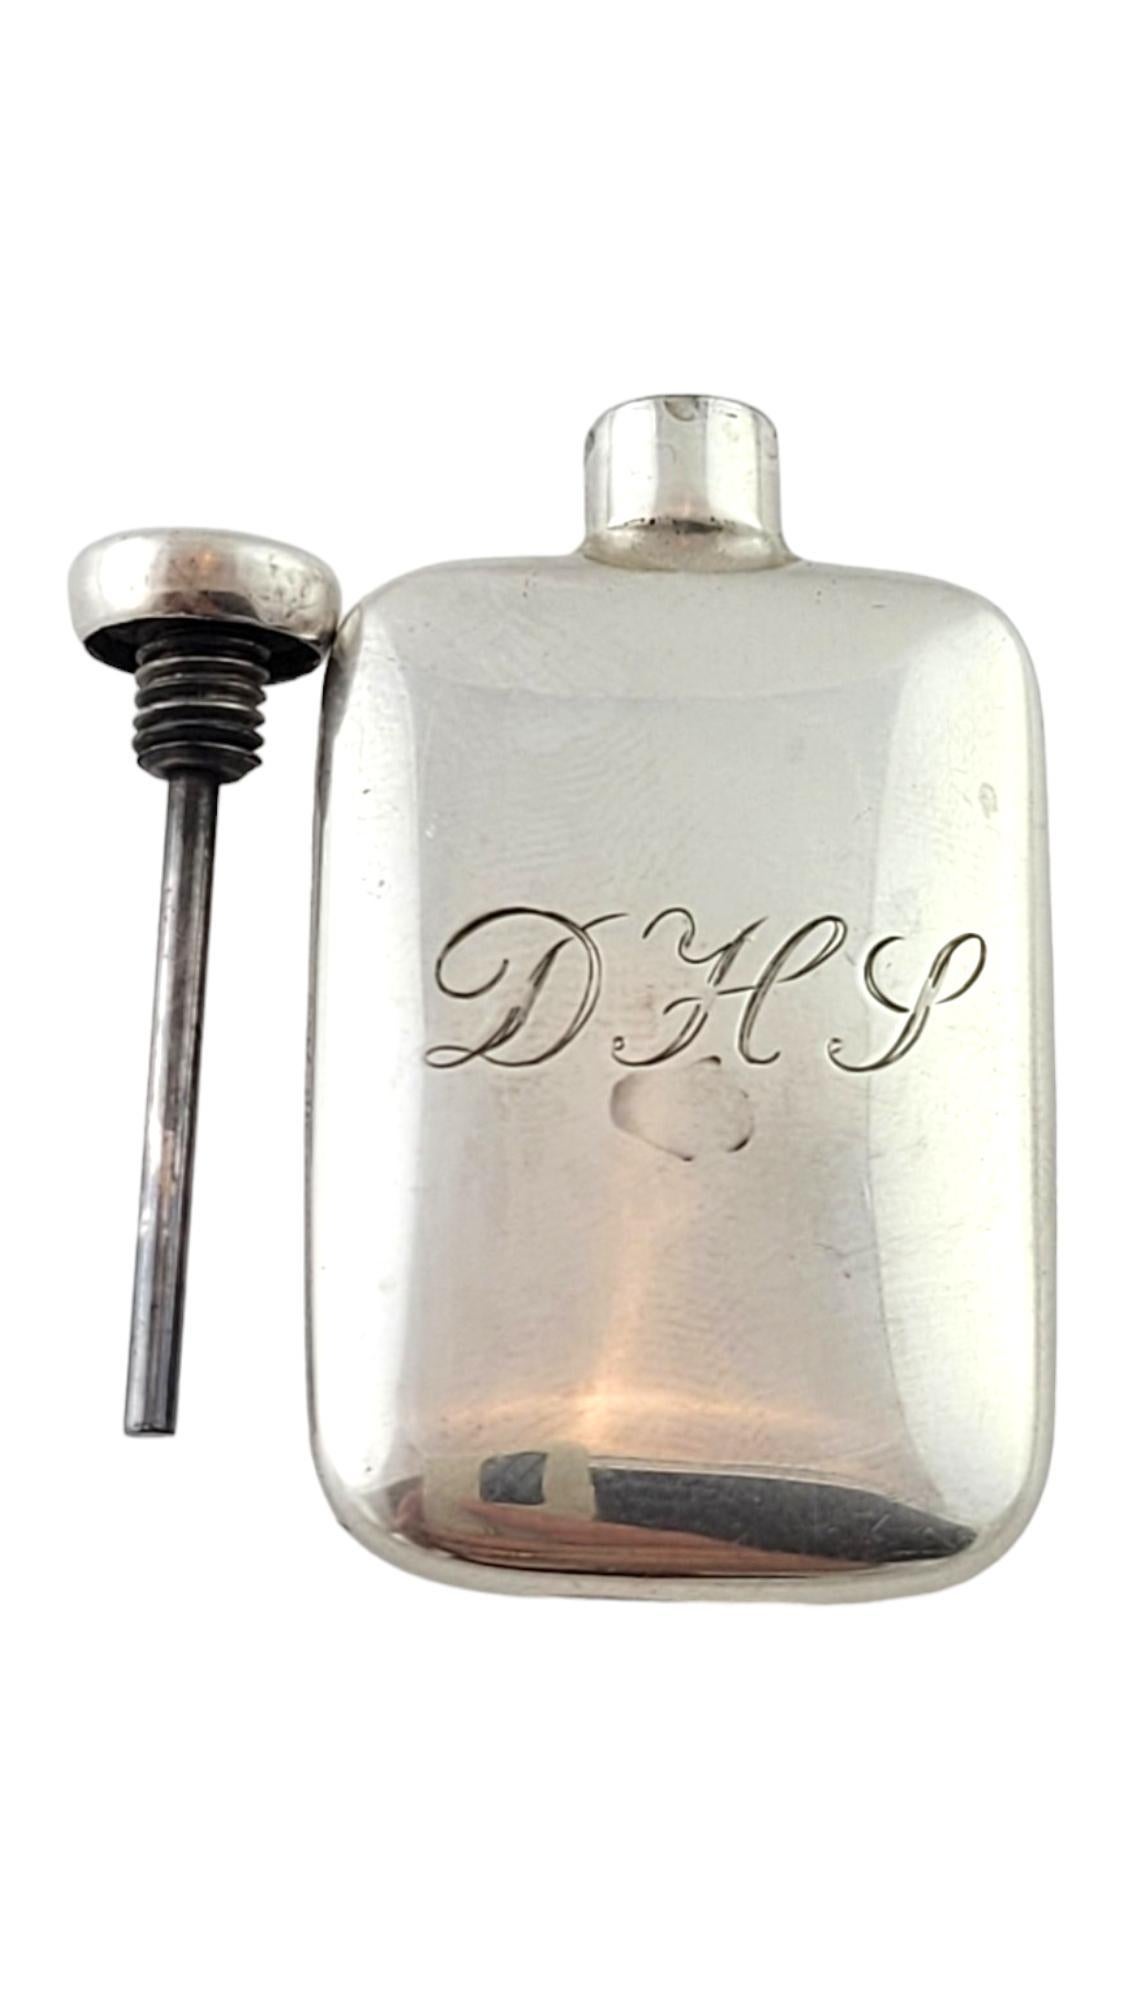 Vintage Tiffany & Co. Sterling Silver Engraved Perfume Flask

This gorgeous mini perfume flask by Tiffany & Co is crafted from sterling silver and is engraved 